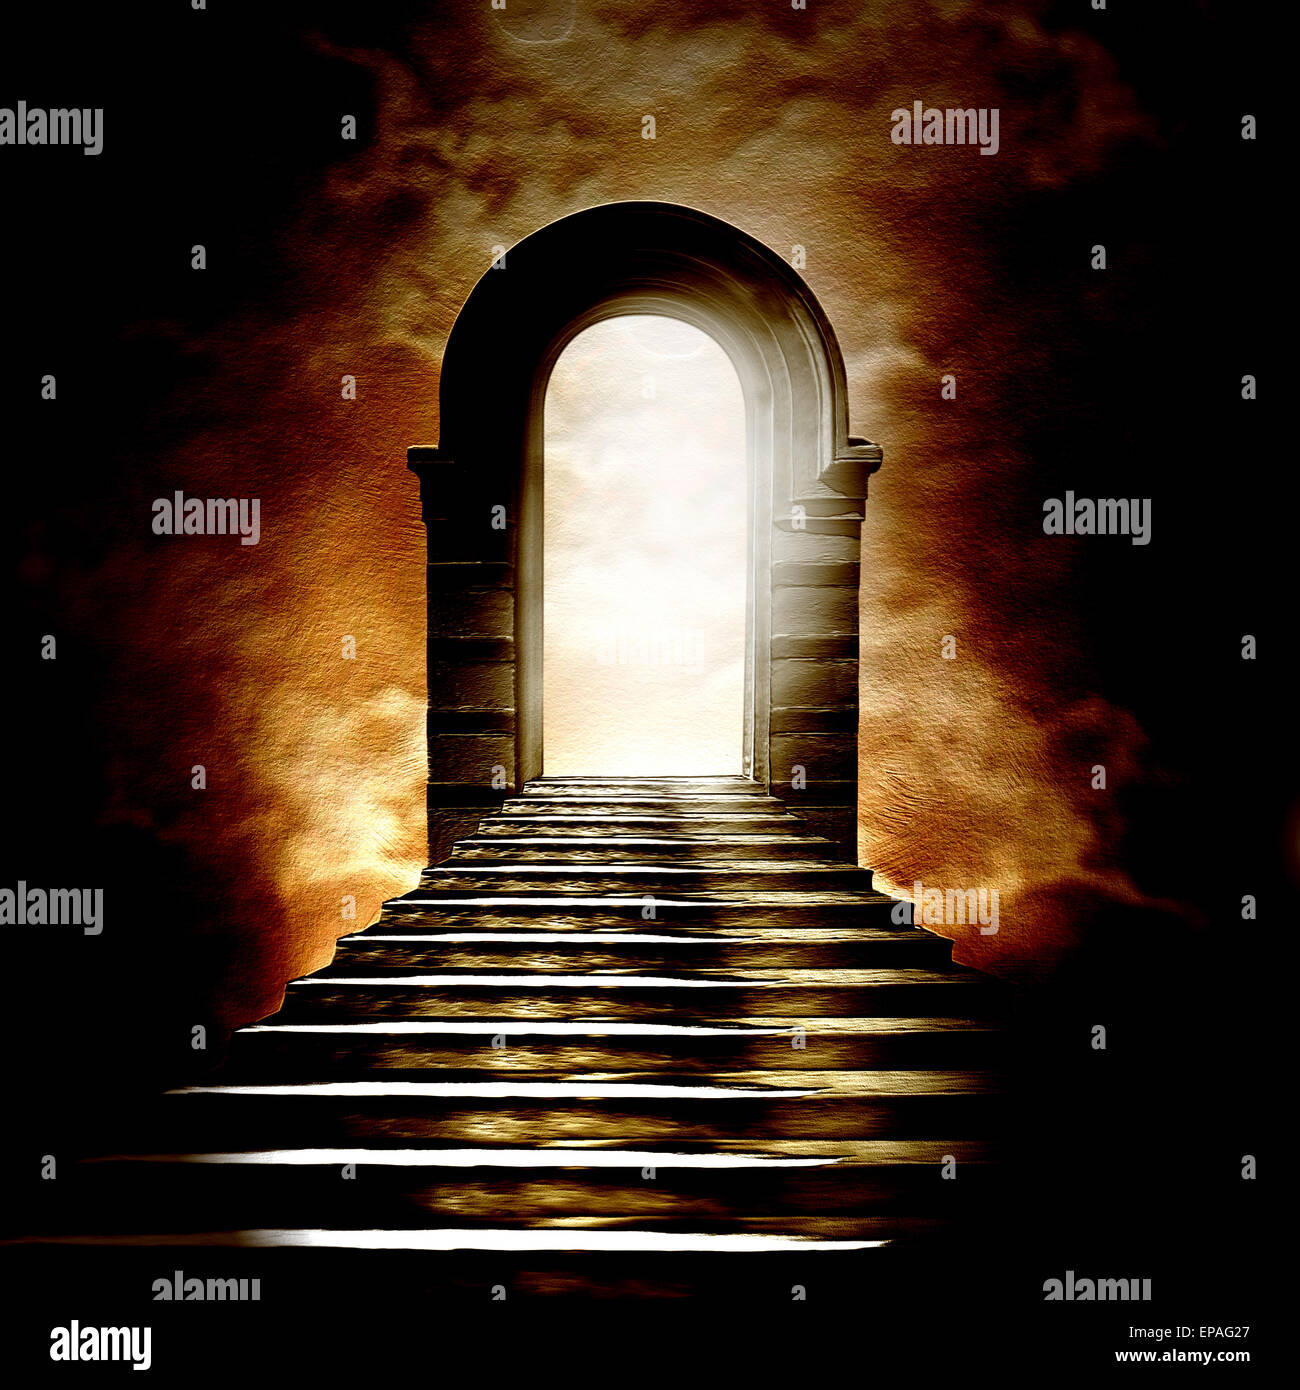 Staircase Leading To Heaven Or Hell Light At The End Of The Tunnel Stock Photo Alamy